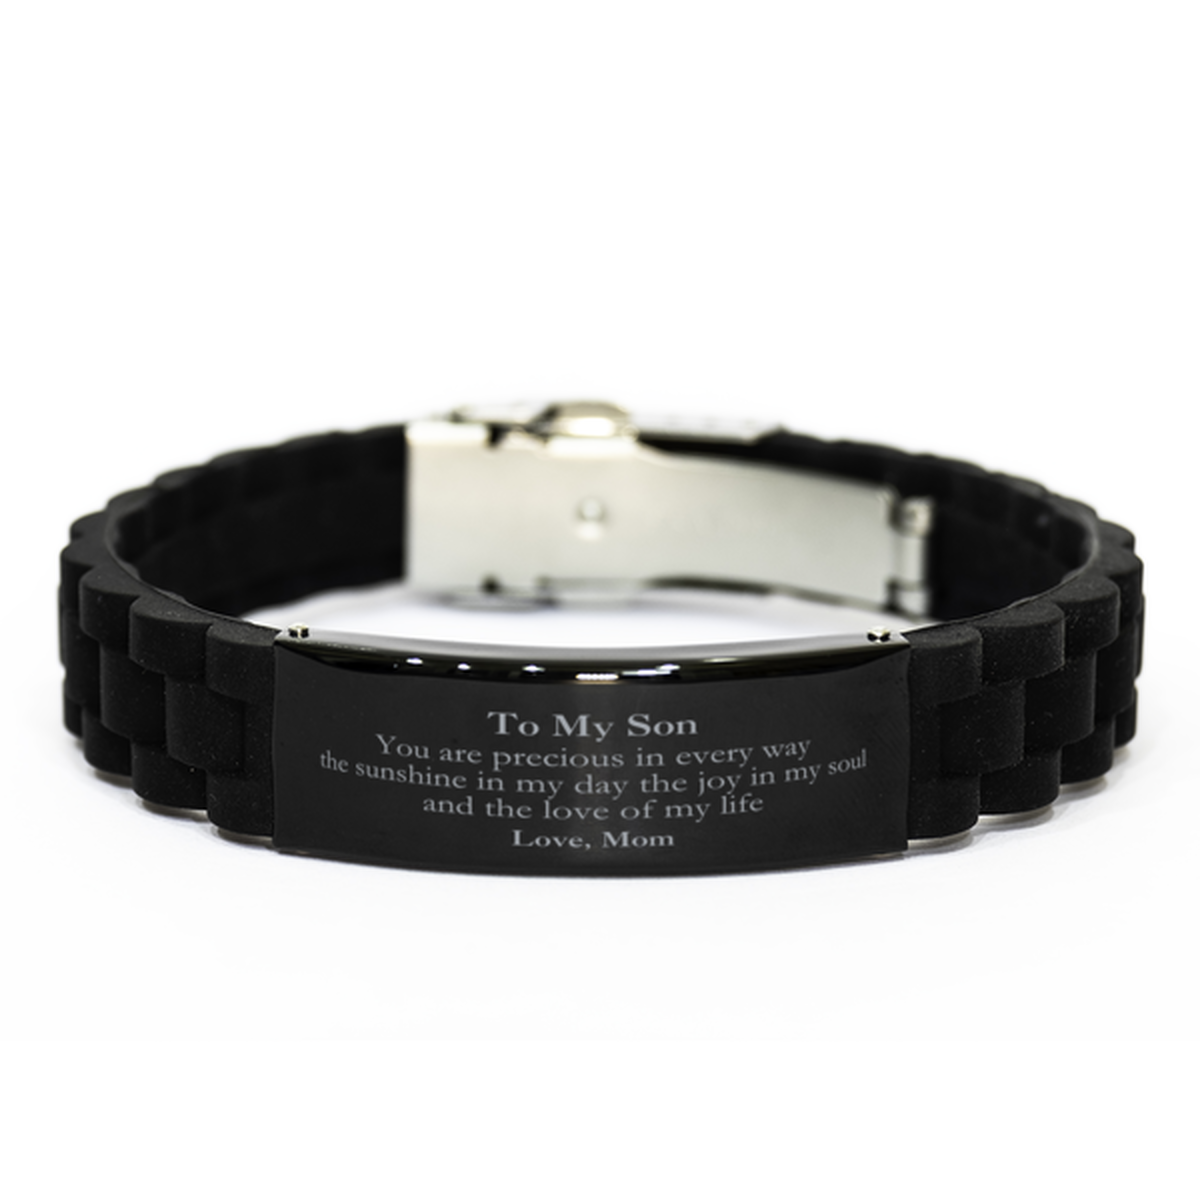 Graduation Gifts for Son Black Glidelock Clasp Bracelet Present from Mom, Christmas Son Birthday Gifts Son You are precious in every way the sunshine in my day. Love, Mom